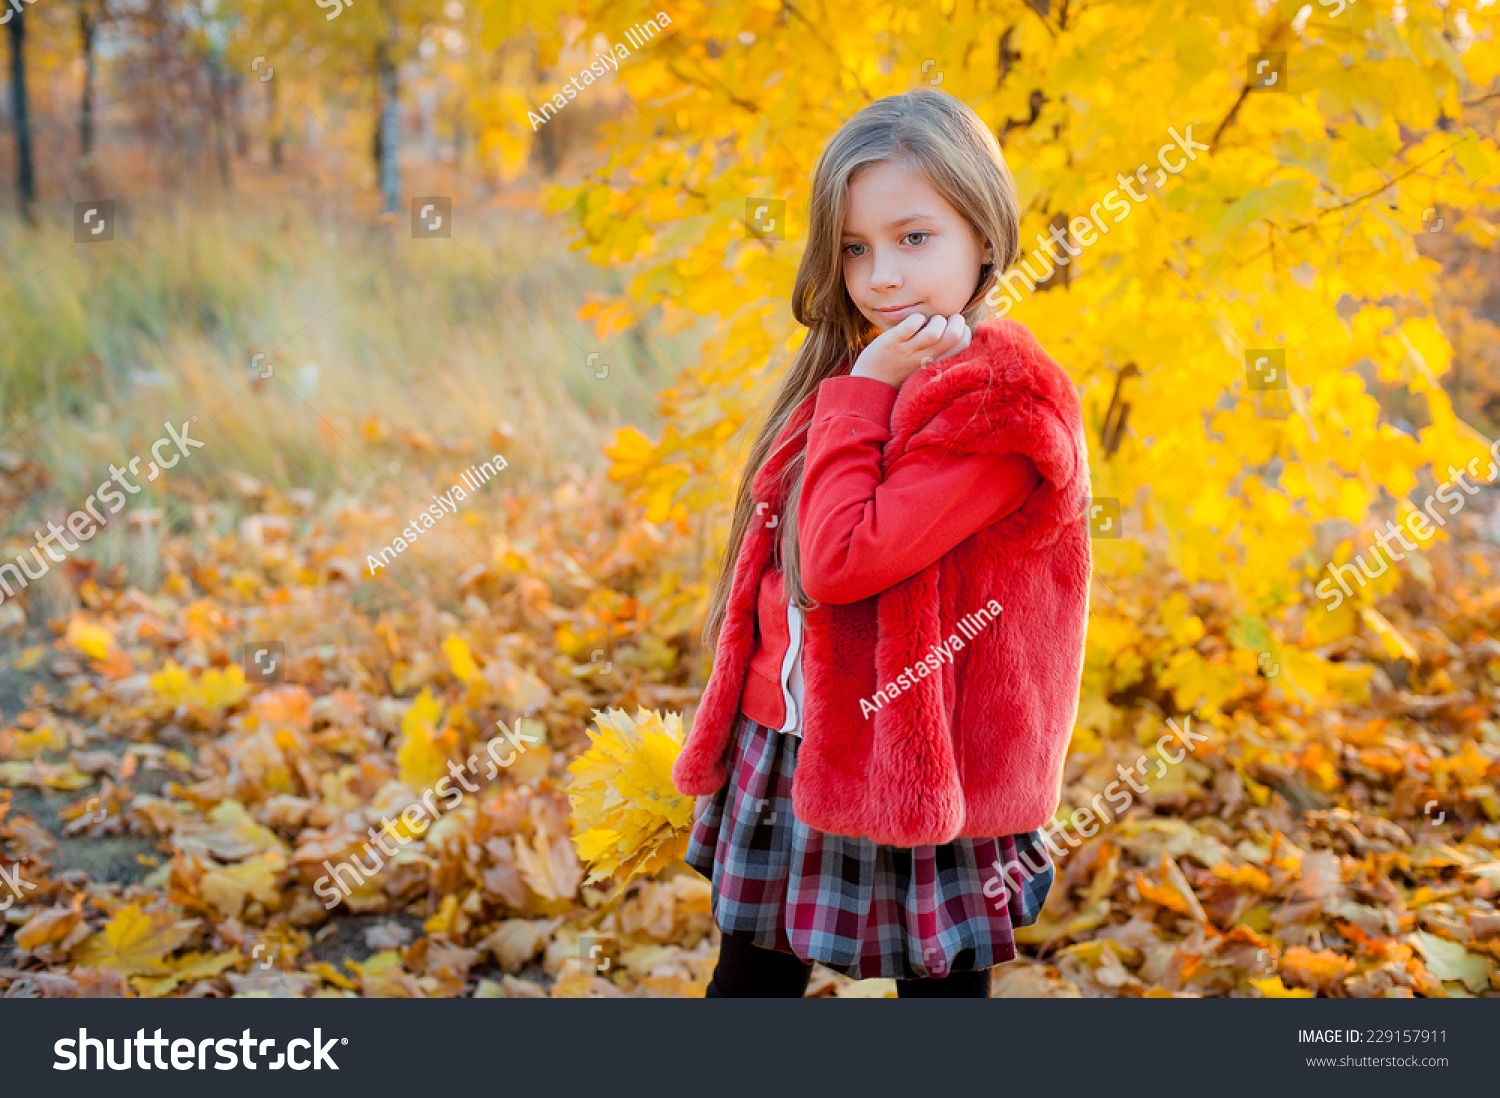 Girl and autumn landscape #229157911